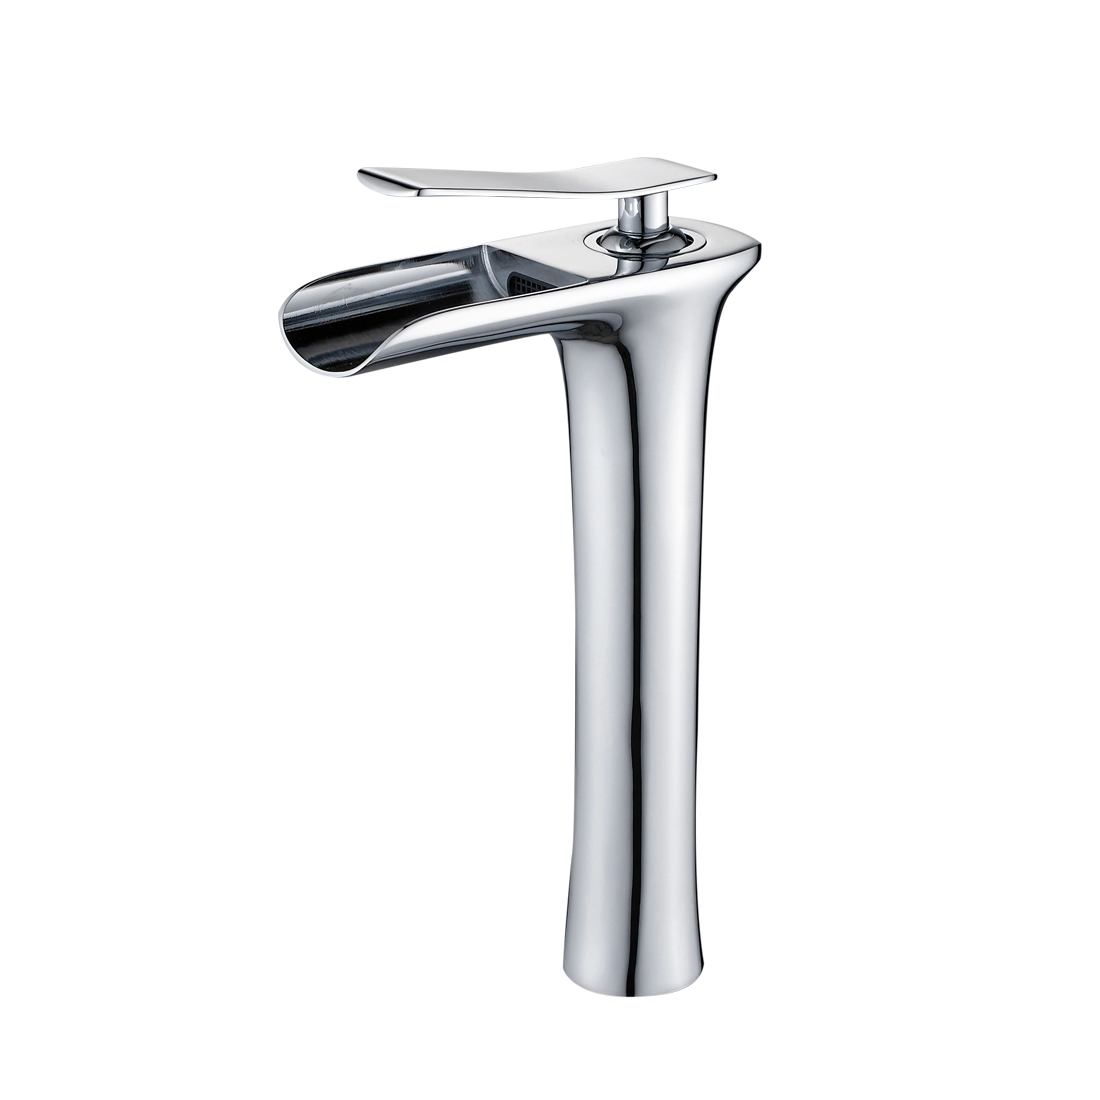 FLG new style chrome brass single handle mixer basin faucets